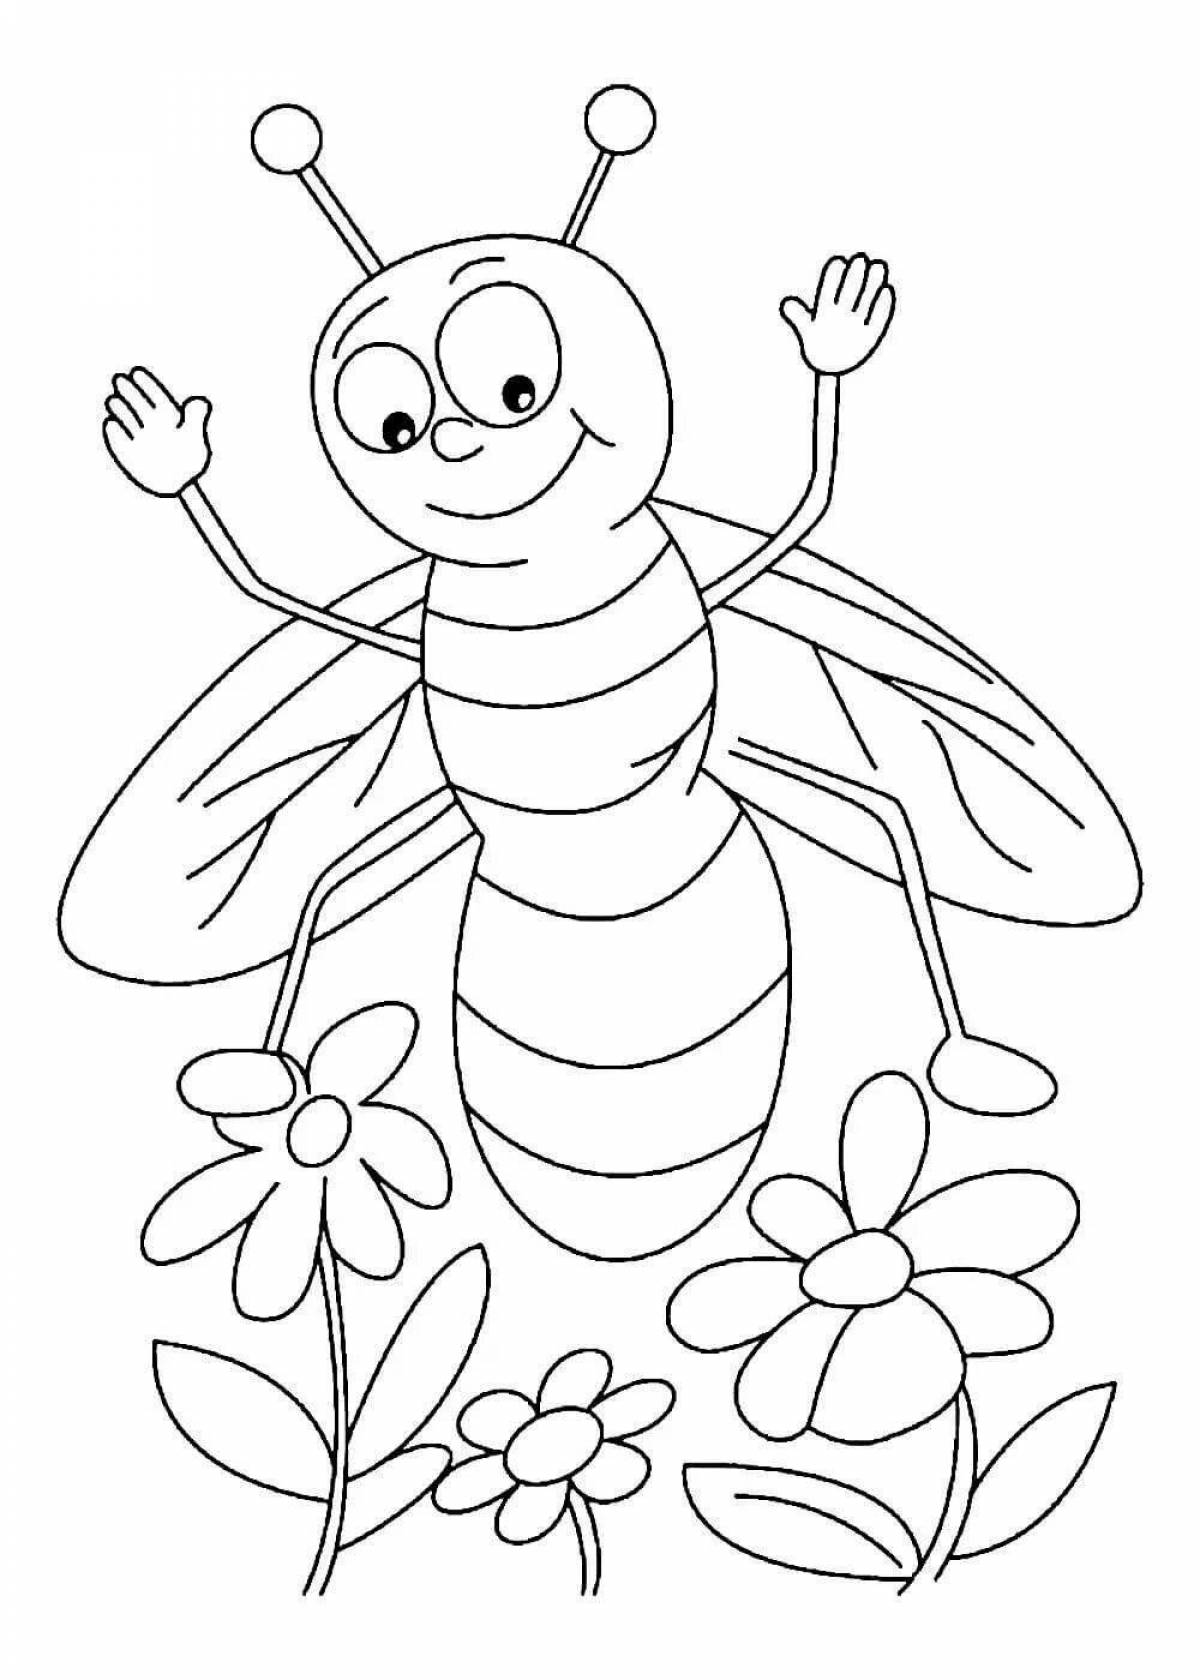 Insect fun coloring book for 5-6 year olds